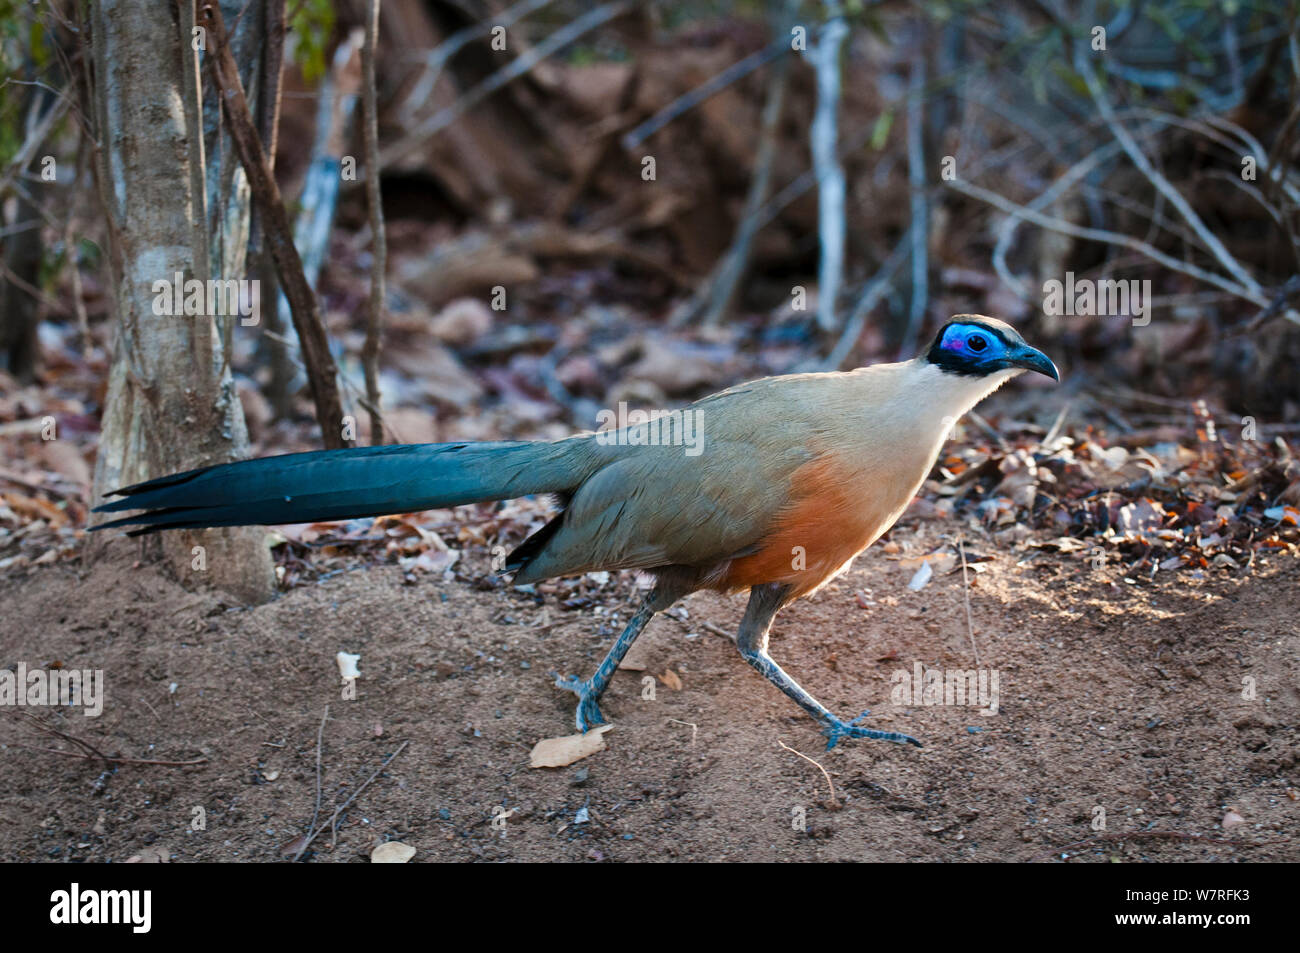 Adult Giant Coua (Coua gigas) foraging on the forest floor. Kirindy Forest, western Madagascar. November 2010 Stock Photo